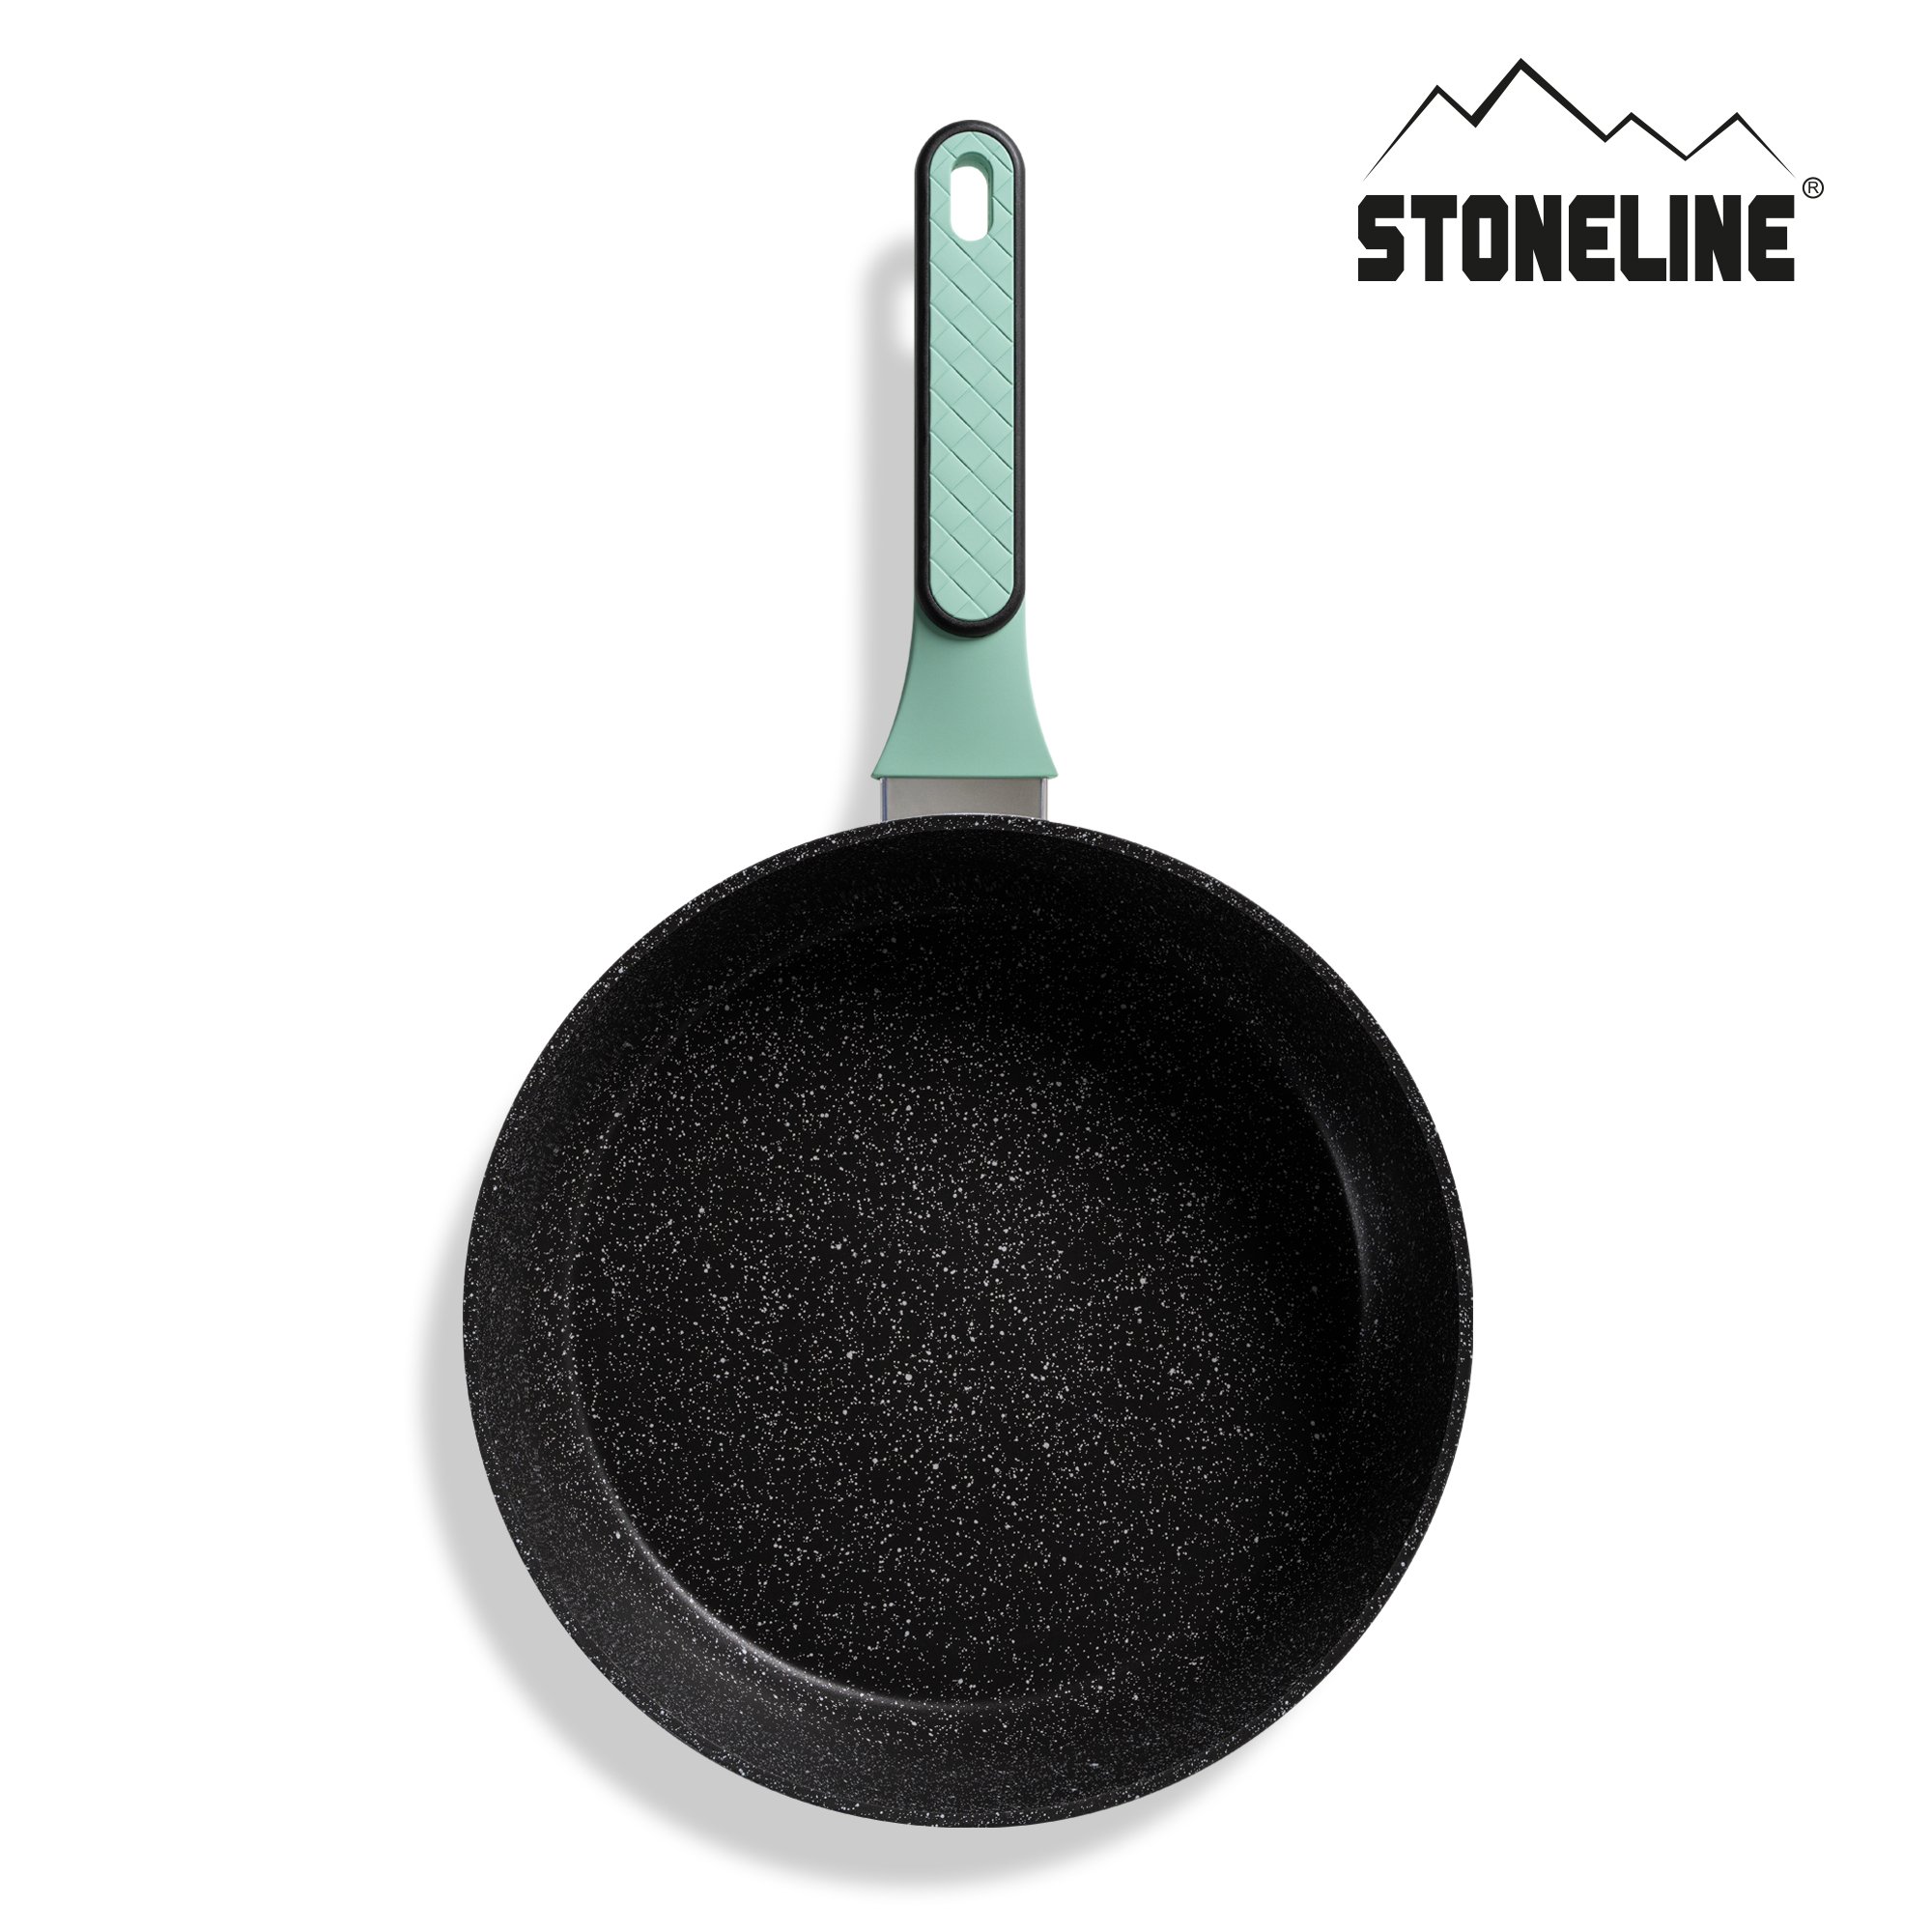 STONELINE® Deep Frying Pan 28 cm, with Lid, Large Non-Stick Pan | mint